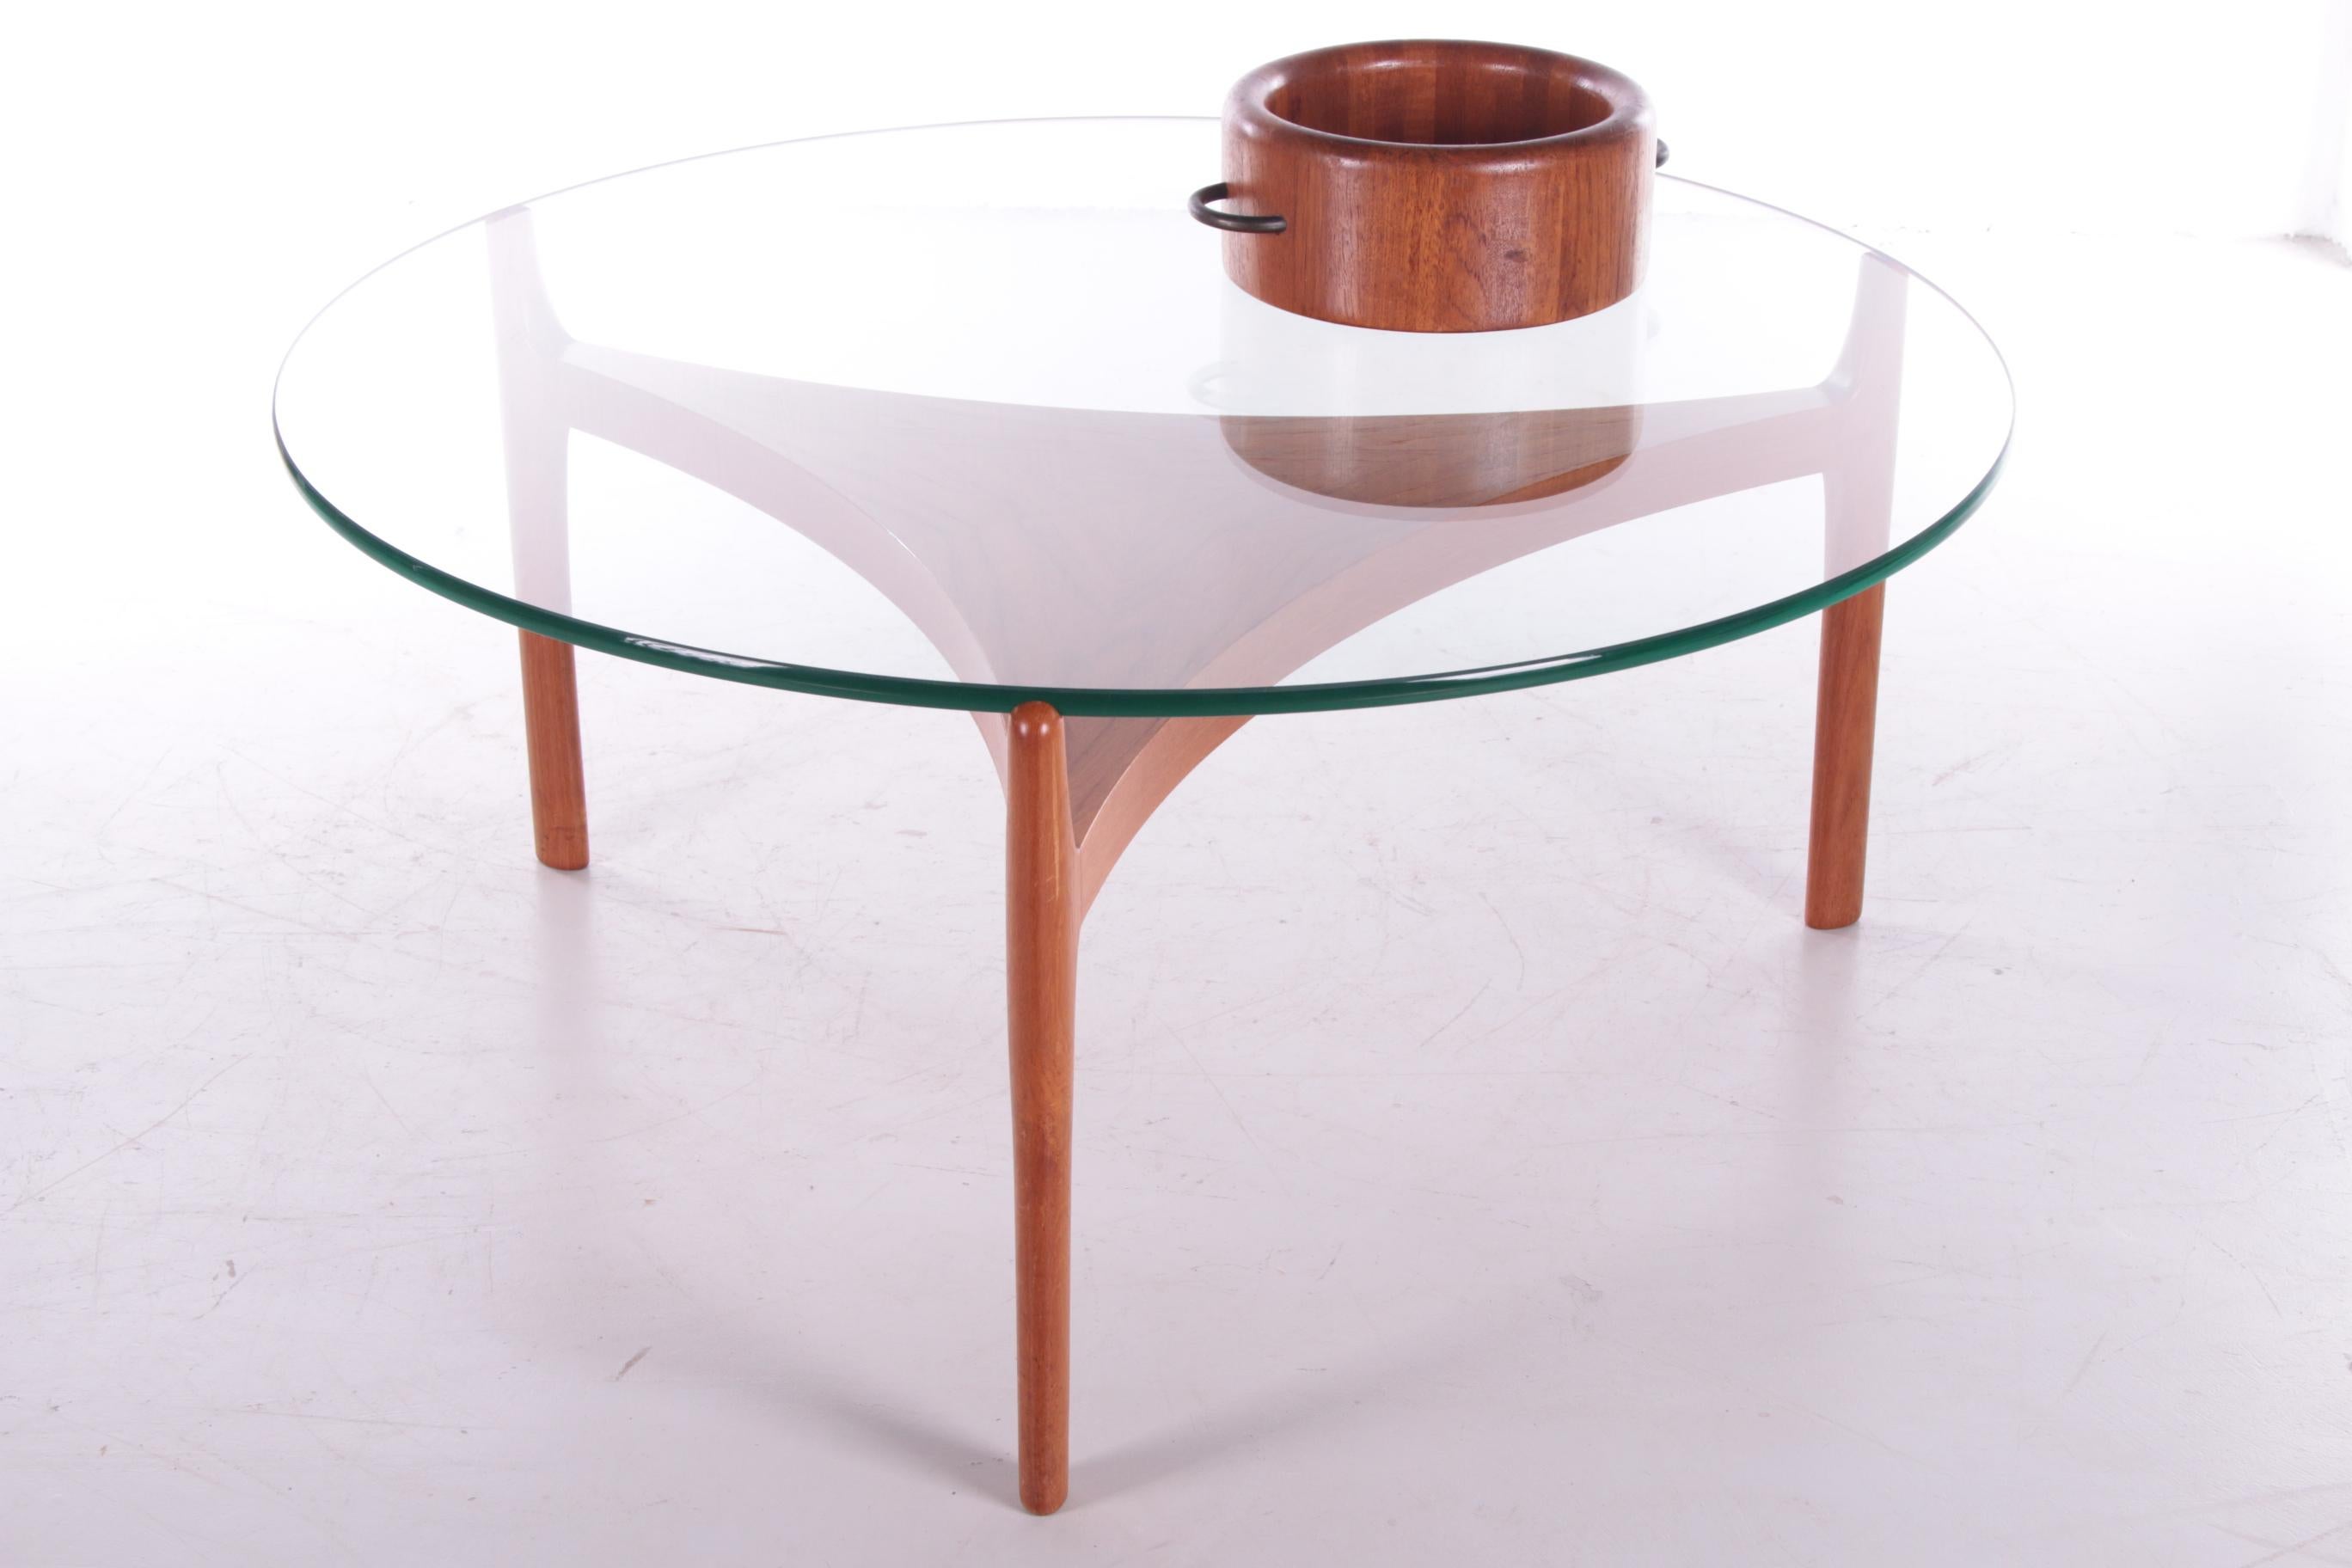 Beautiful teak coffee table designed by Sven Ellekaer for Christian Linneberg Mobelfabrik, Denmark in 1960.

The elegant base is made of bent teak with a thick glass top. The combination of the two materials gives the table a simple and organic